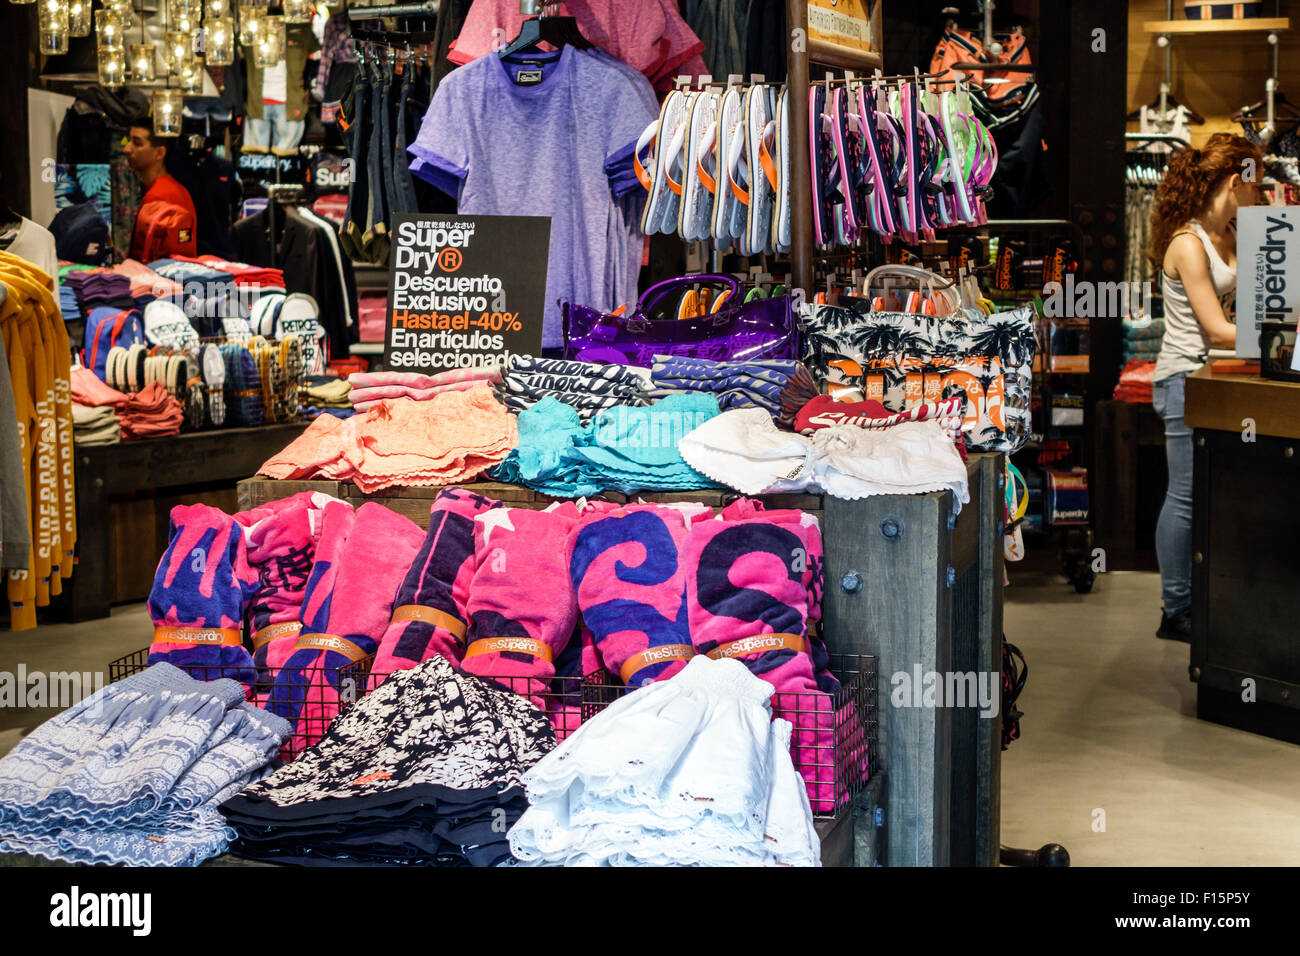 Superdry t stock and - Alamy